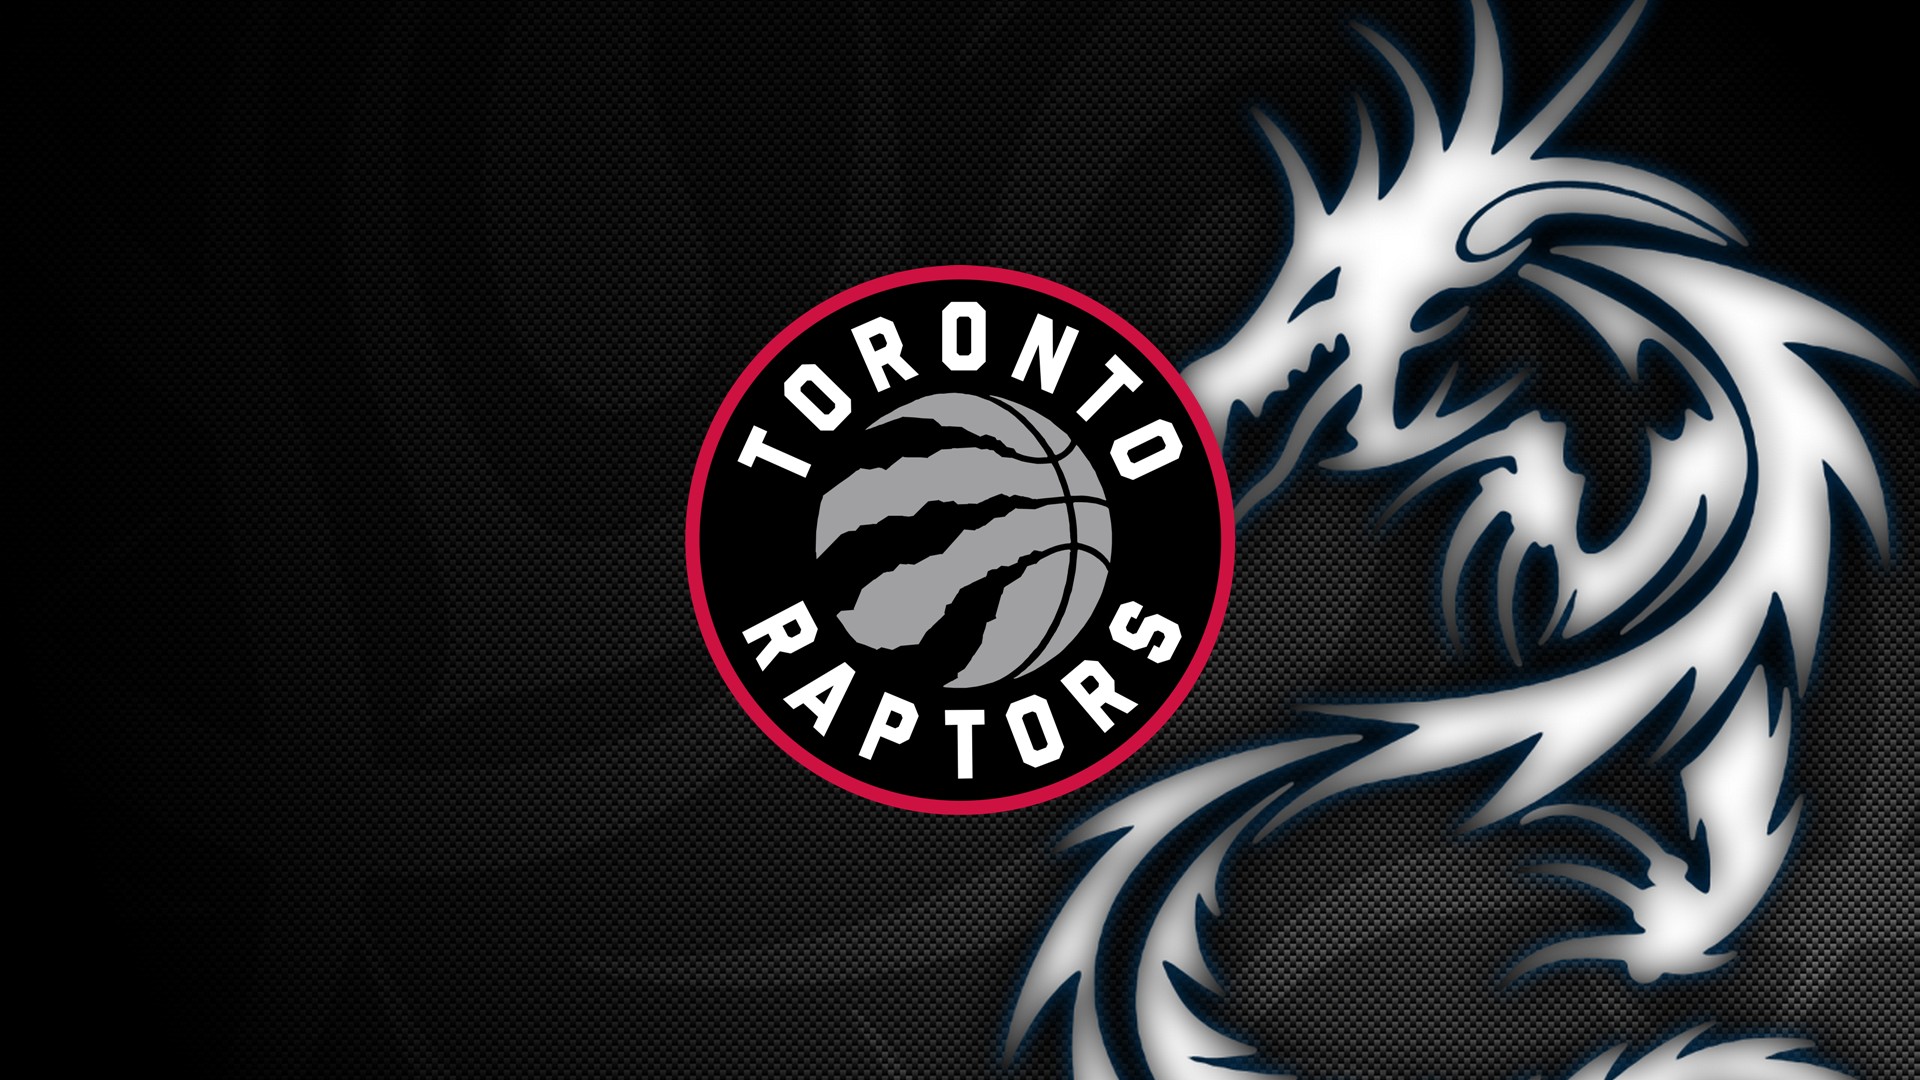 Wallpapers Raptors Basketball with image dimensions 1920x1080 pixel. You can make this wallpaper for your Desktop Computer Backgrounds, Windows or Mac Screensavers, iPhone Lock screen, Tablet or Android and another Mobile Phone device